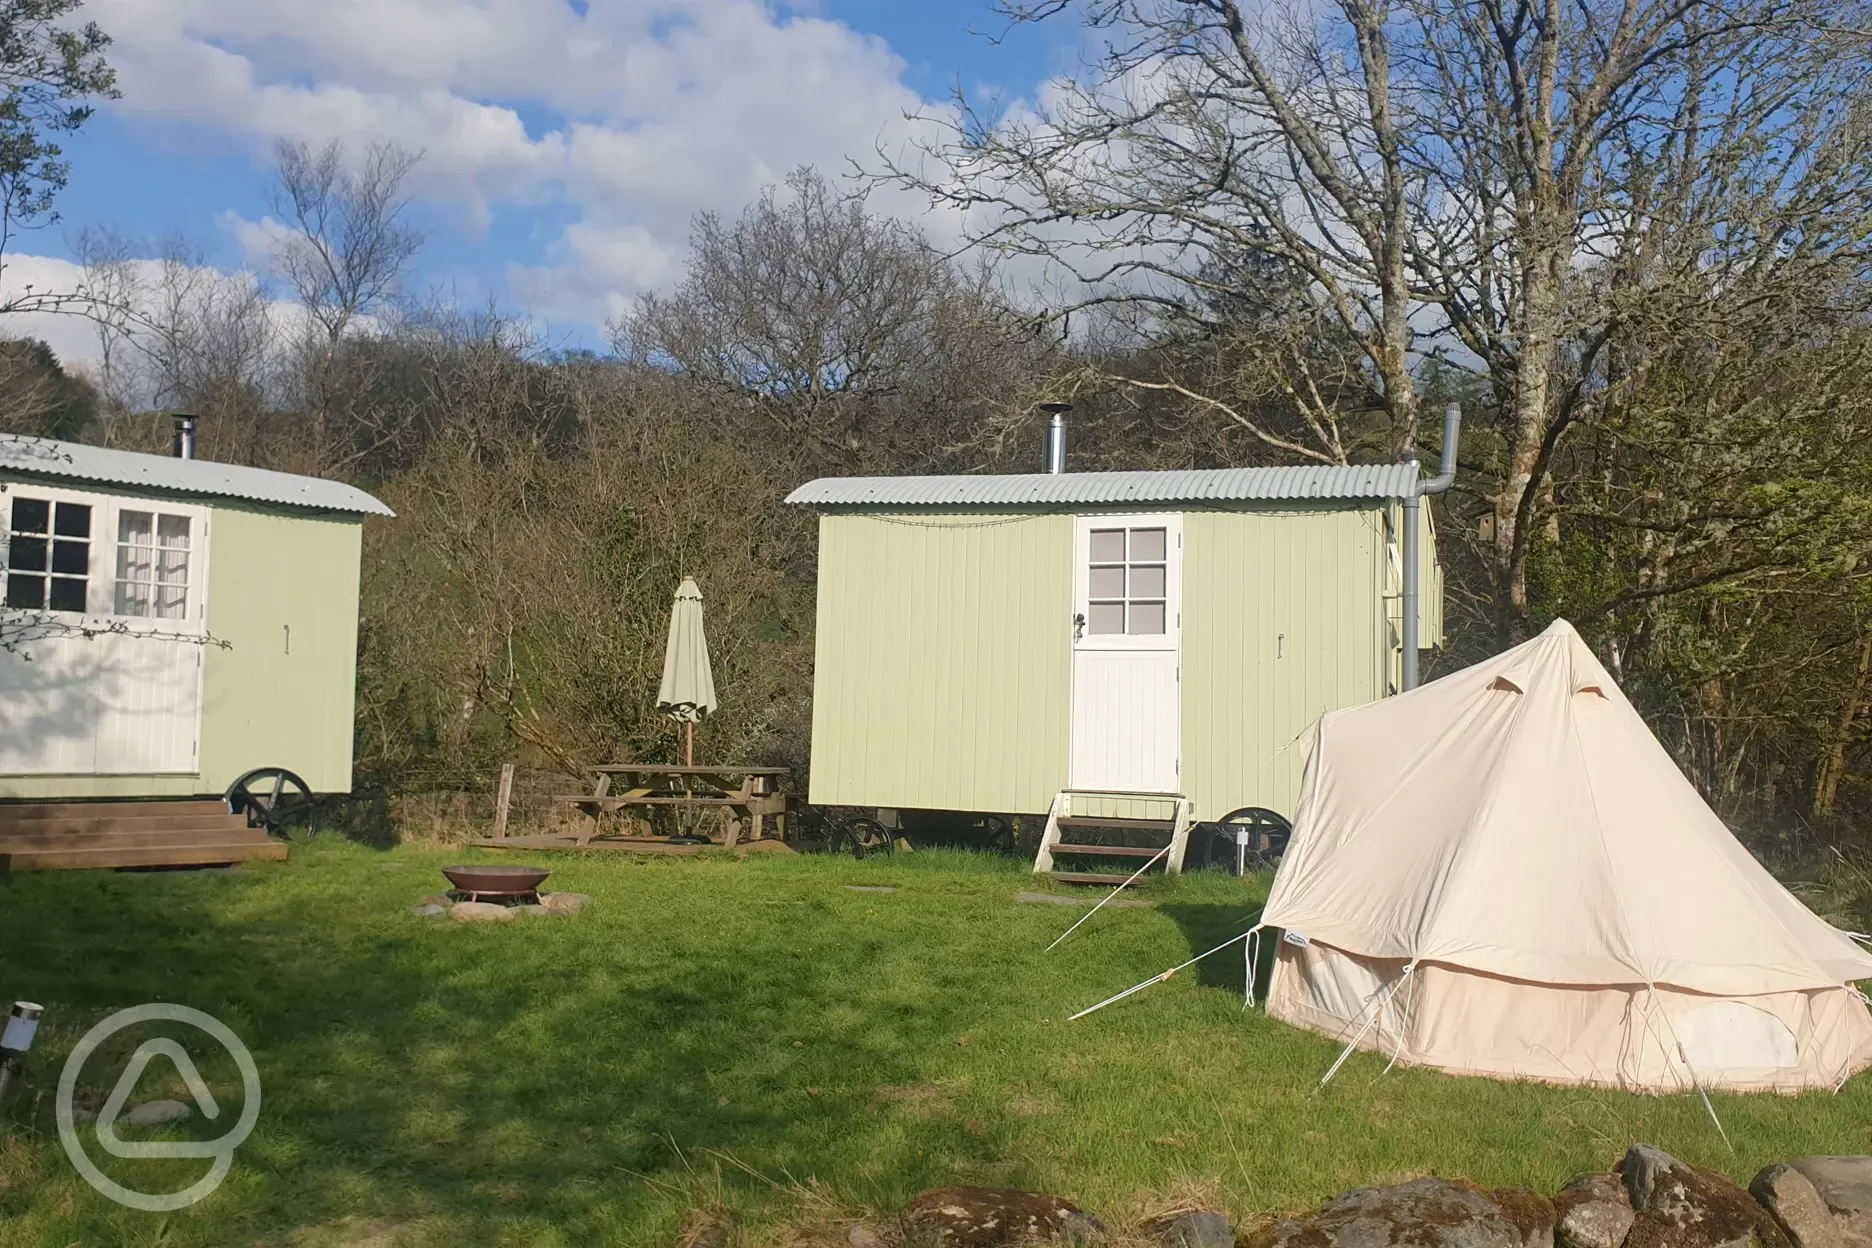 Shepherds' huts with children's bell tent